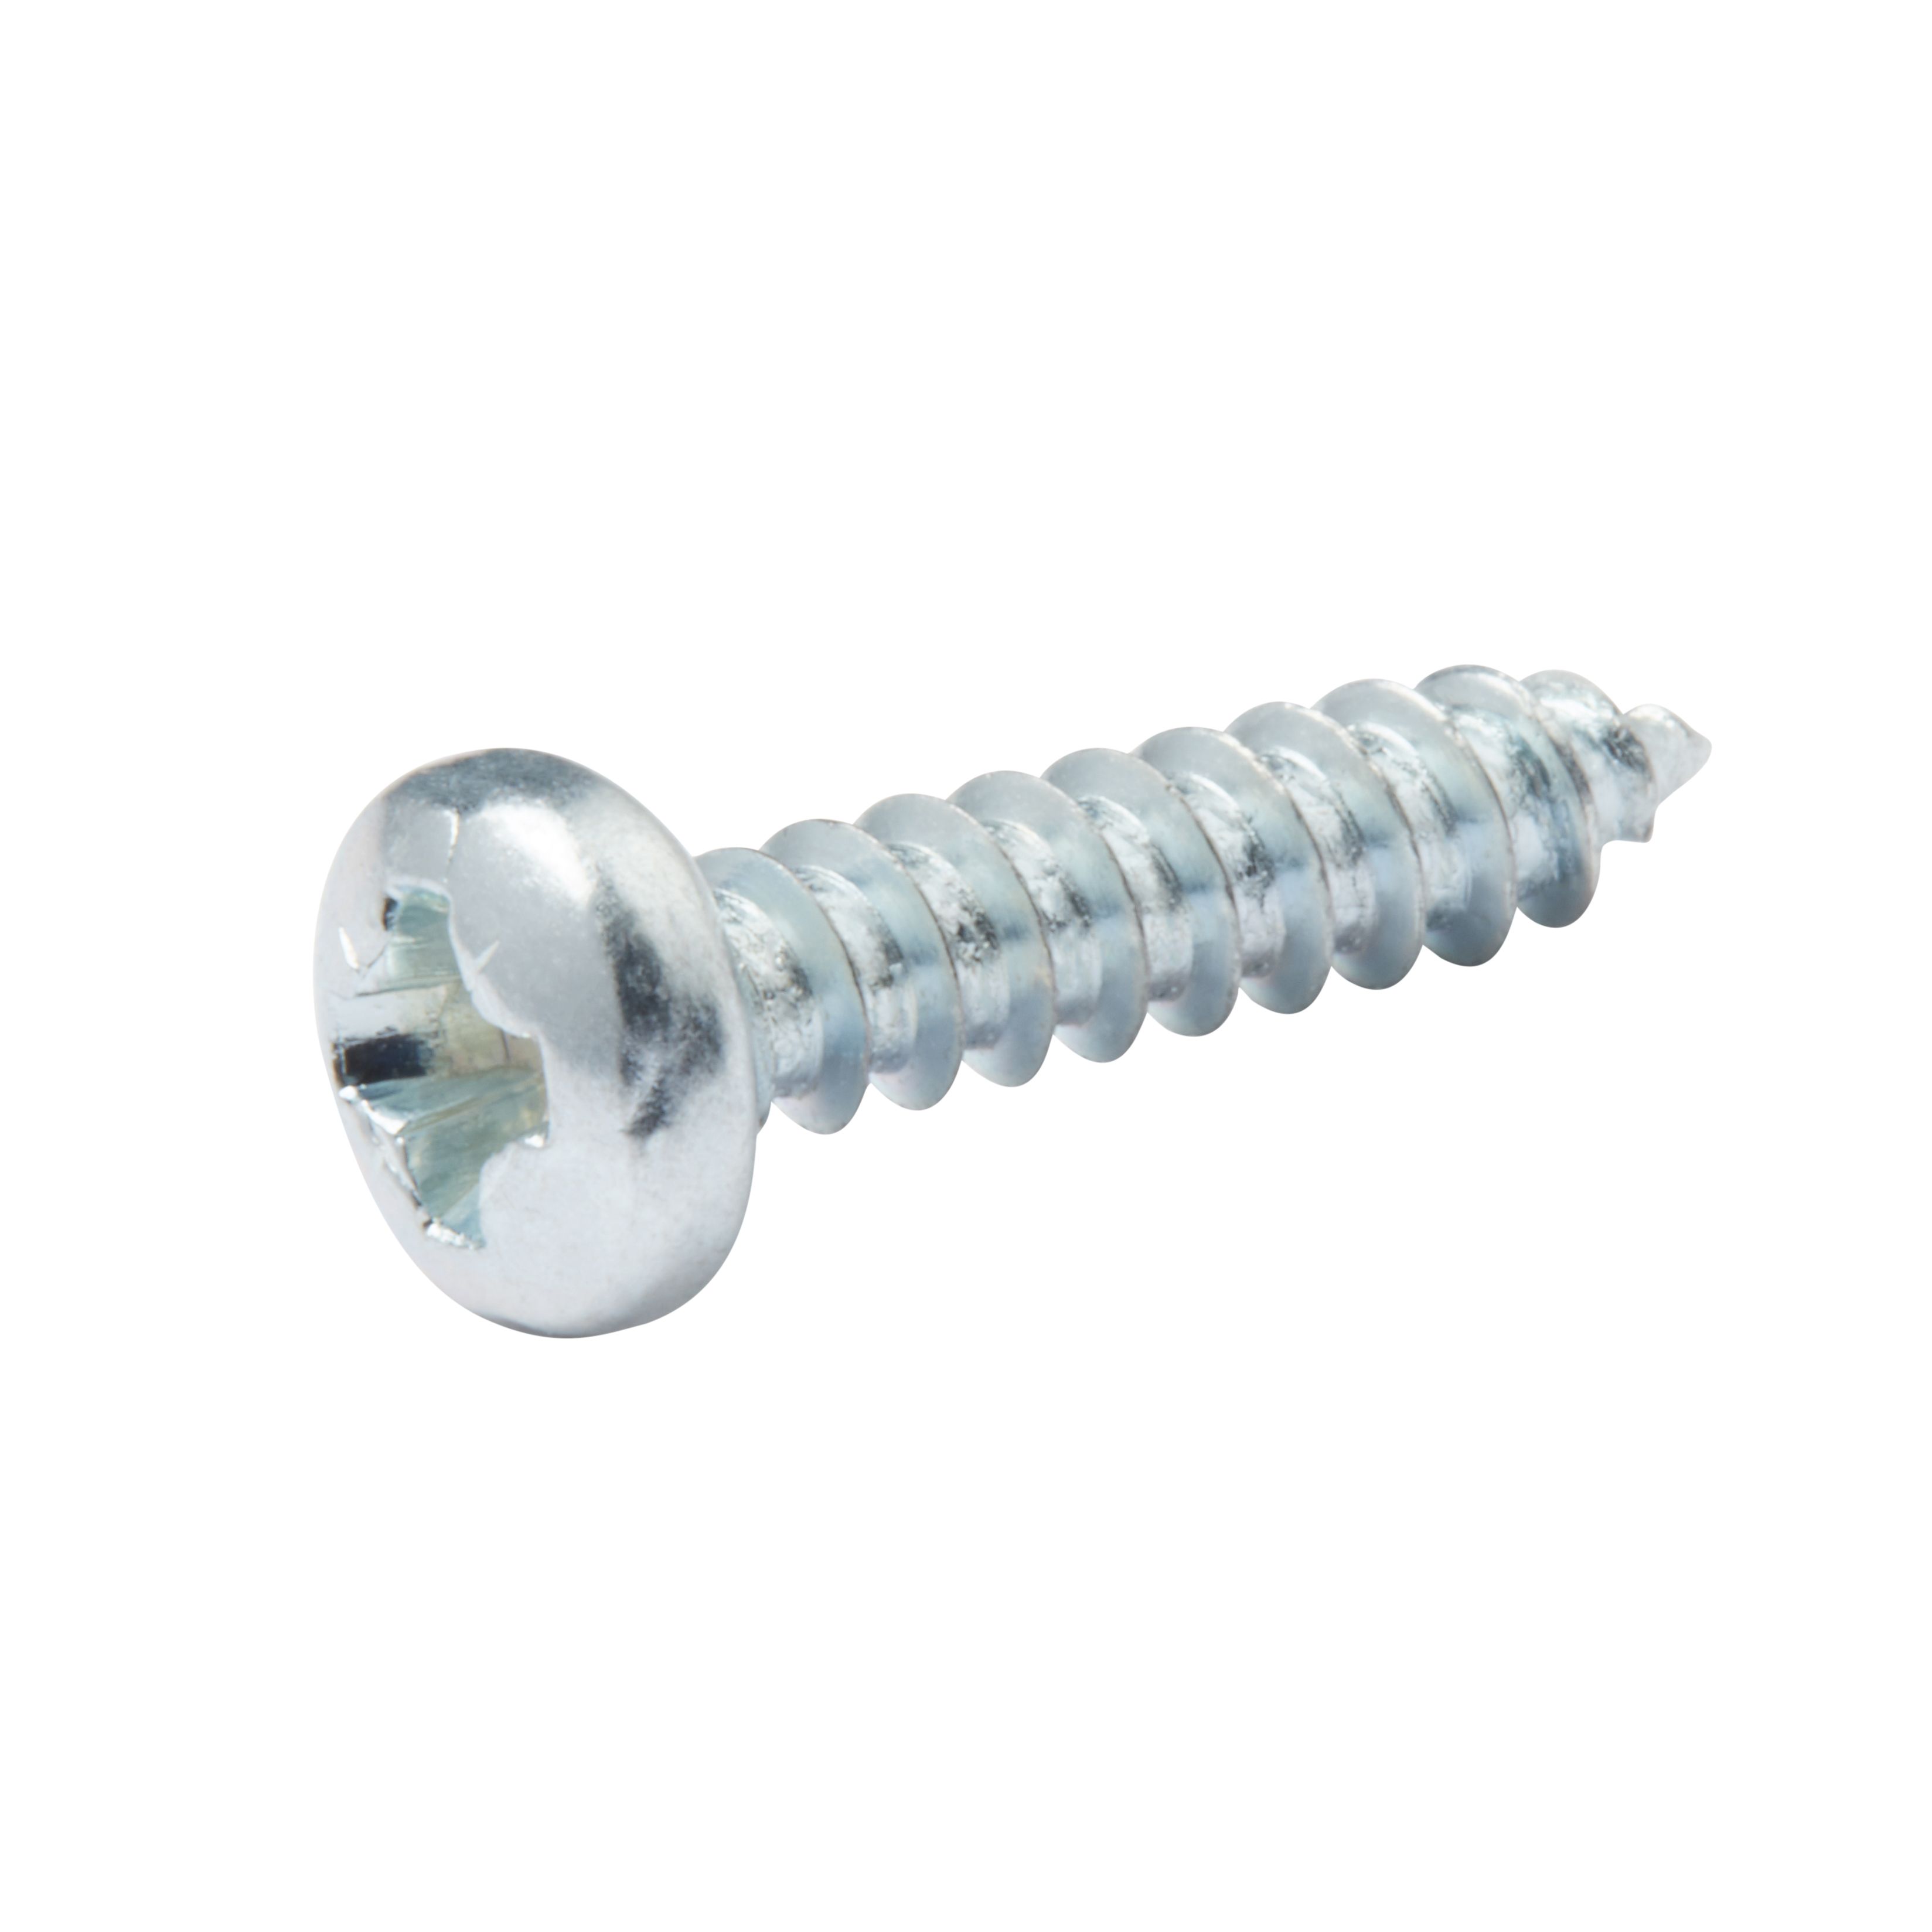 Diall PZ Pan head Zinc-plated Hardened steel Self-drilling screw (Dia)3.5mm (L)16mm, Pack of 25